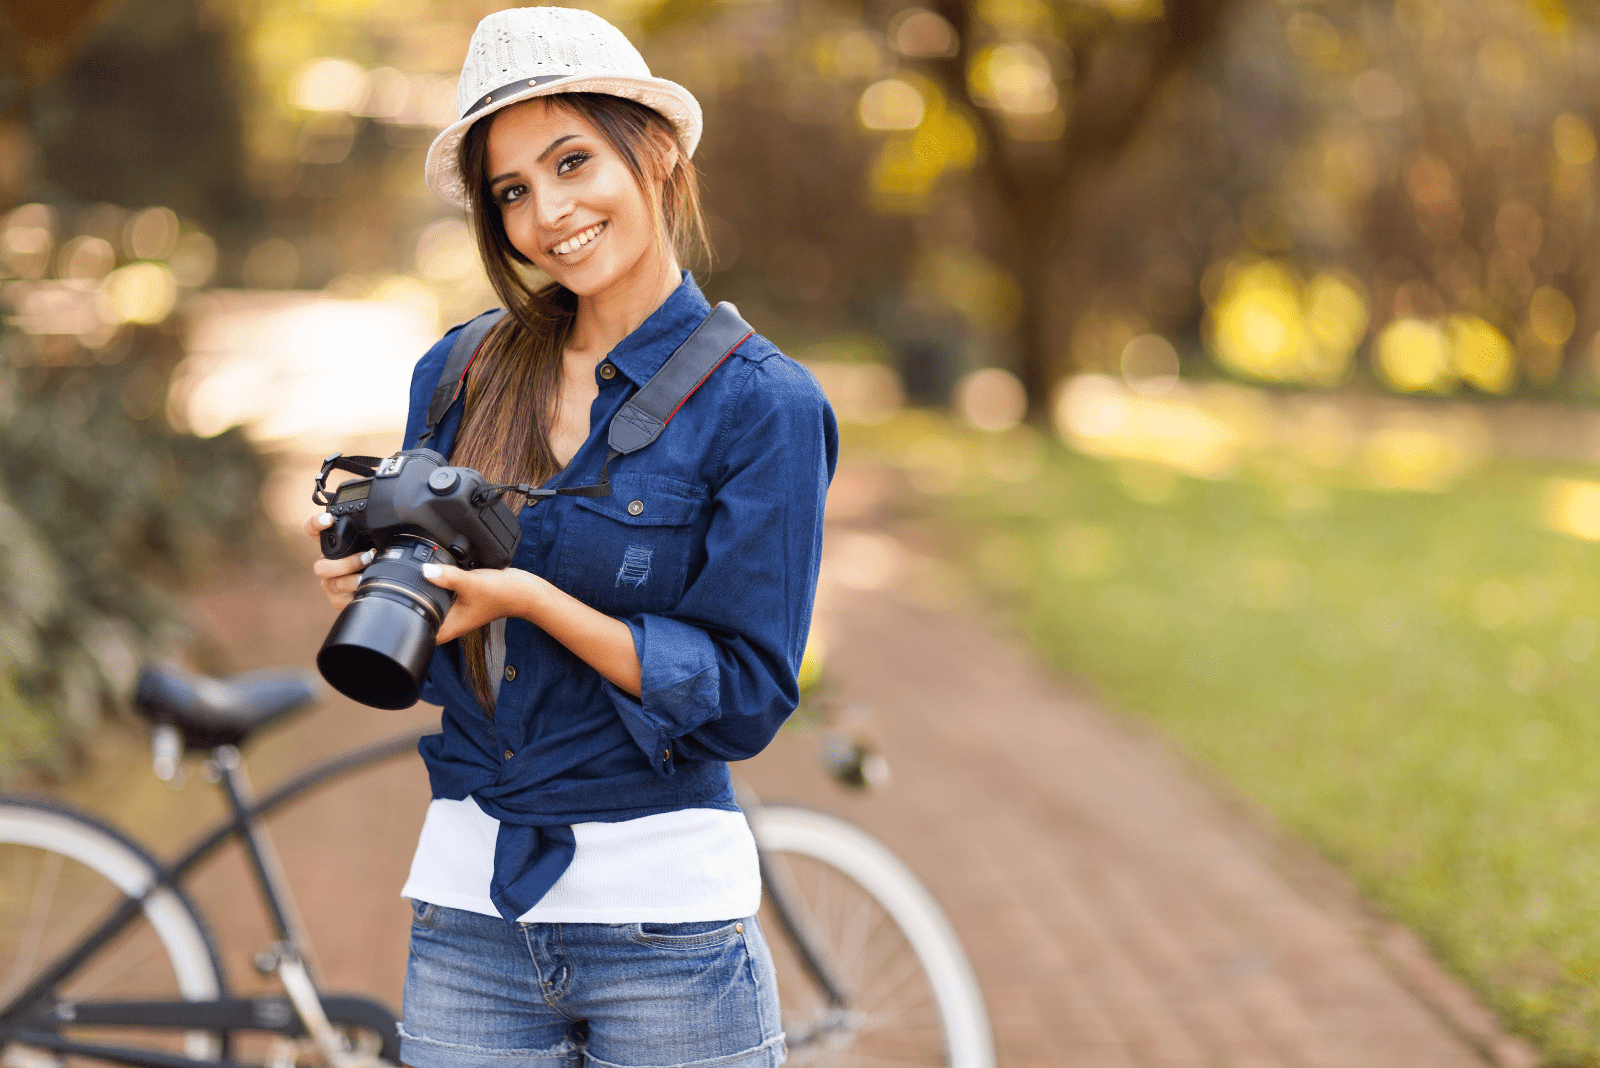 66 Interesting And Fun Hobbies For Women In Their 30s